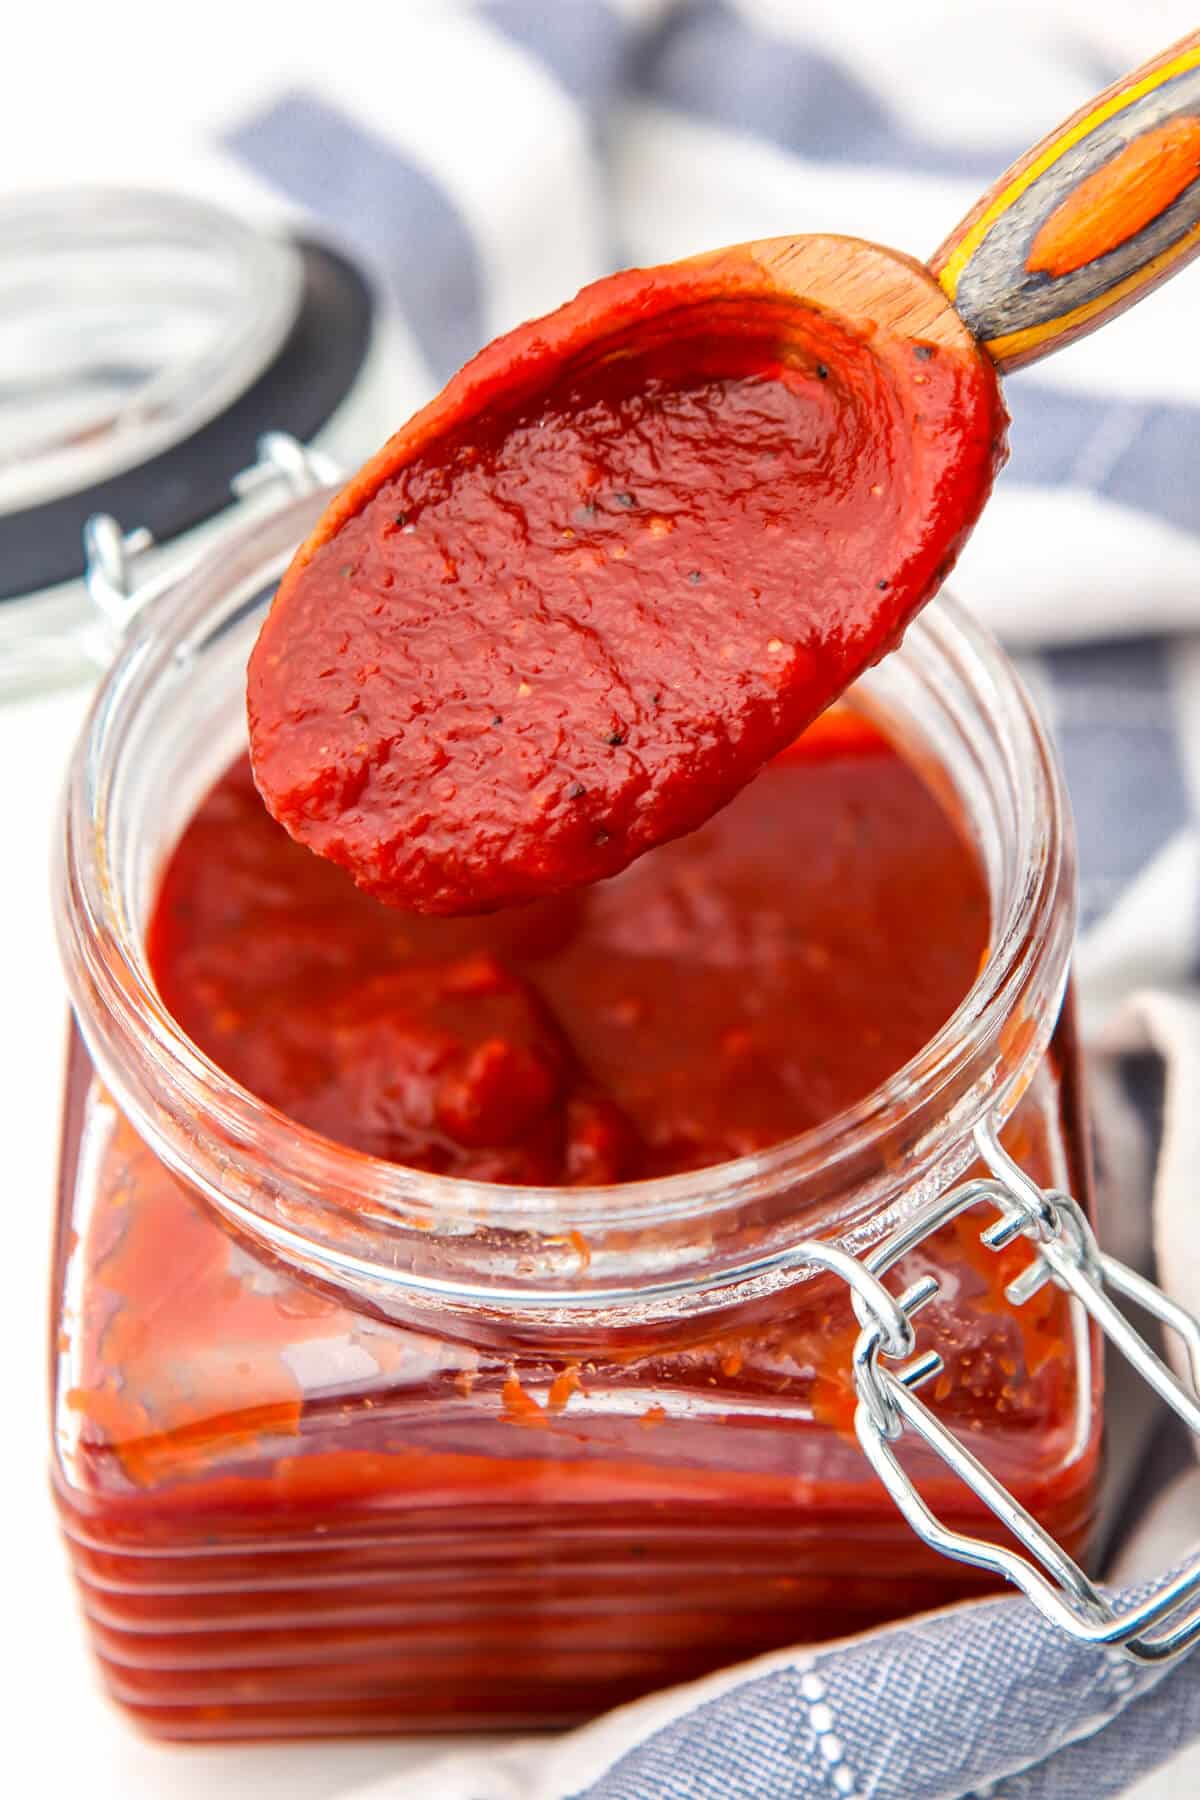 Vegan bbq sauce in a glass jar with a spoon scooping up some sauce.